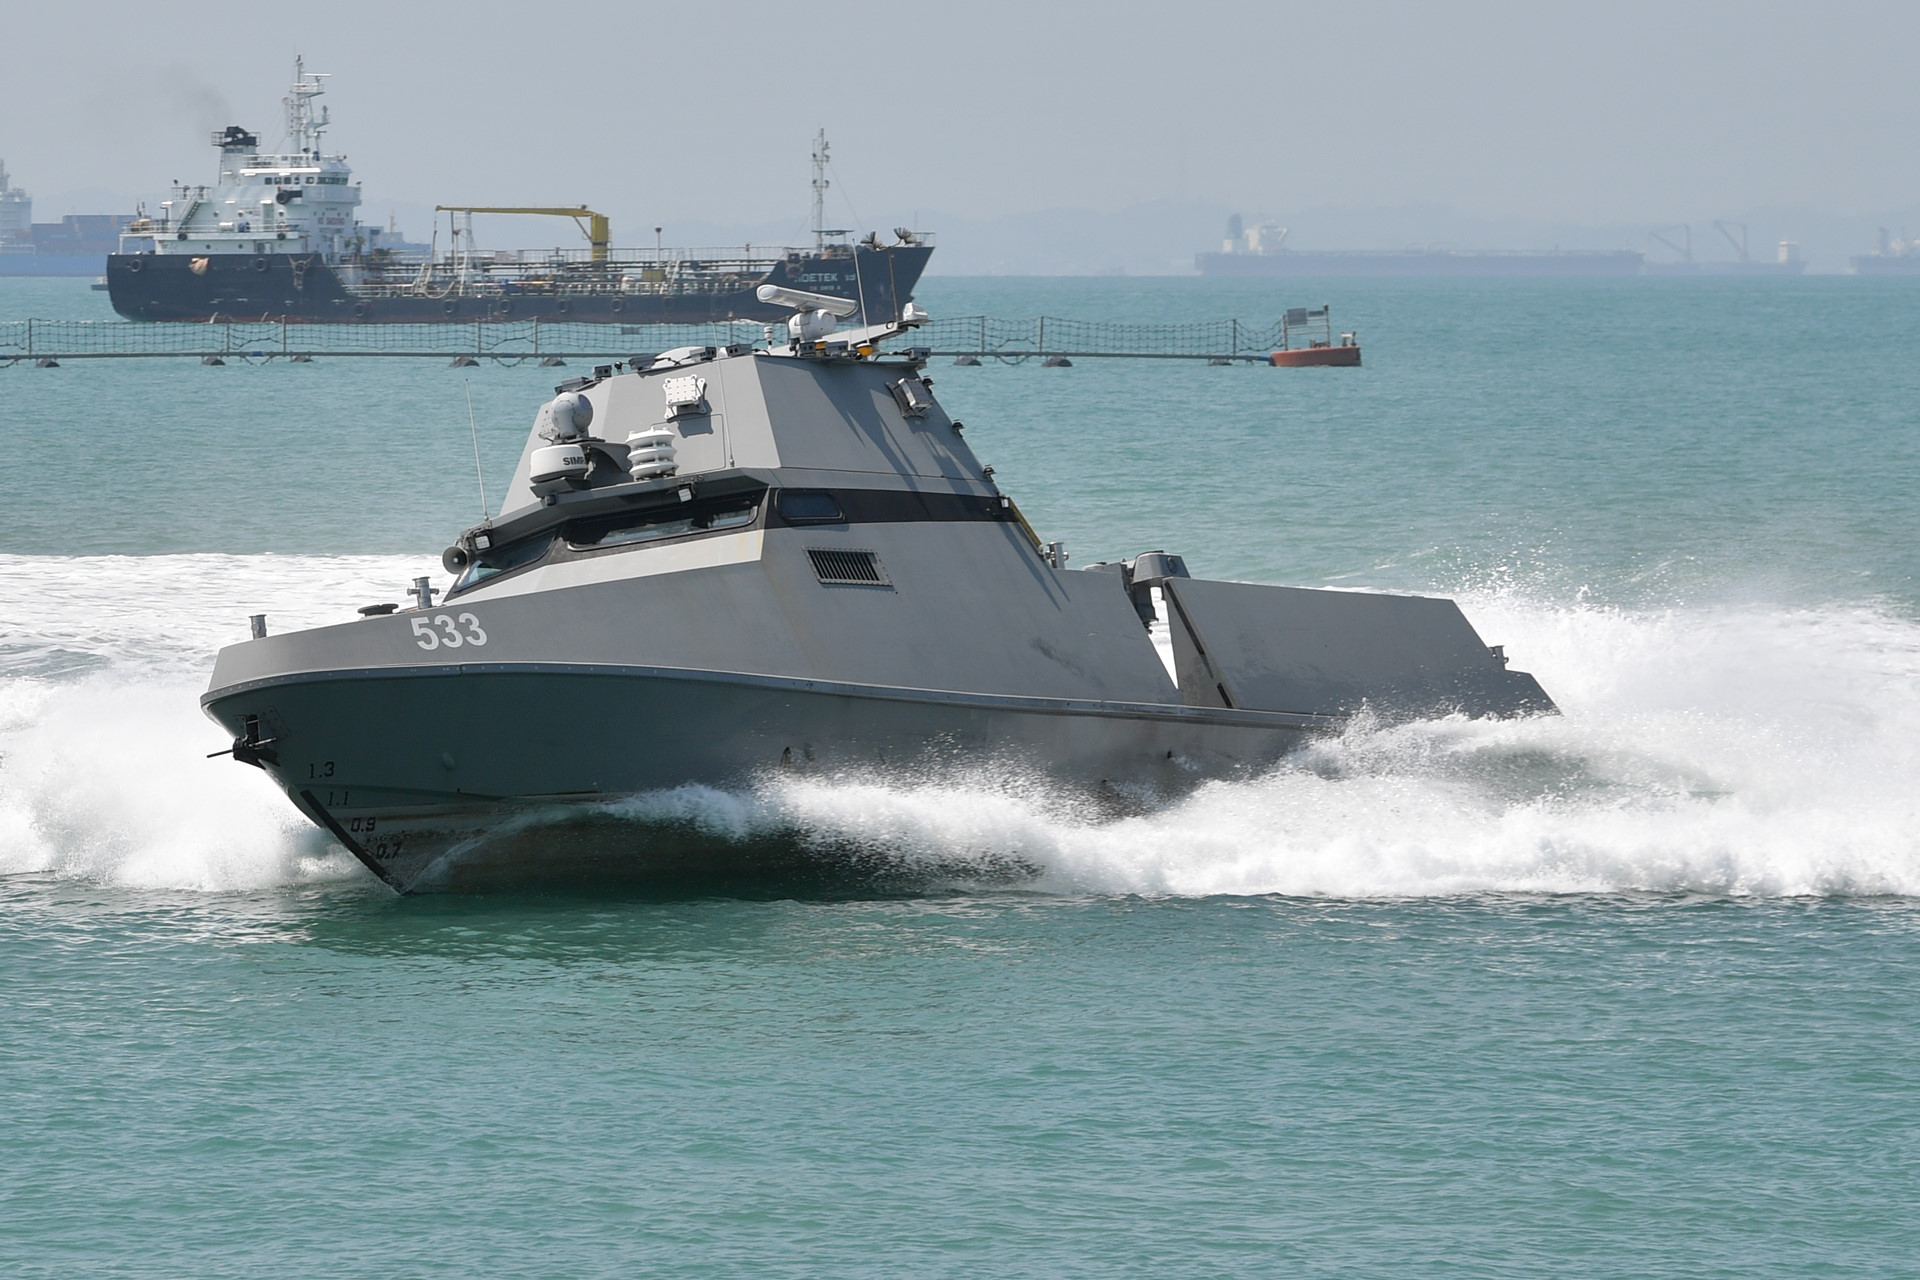 The Maritime Security Unmanned Surface Vessels (MARSEC USVs) can provide a persistent presence to patrol Singapore's waters.